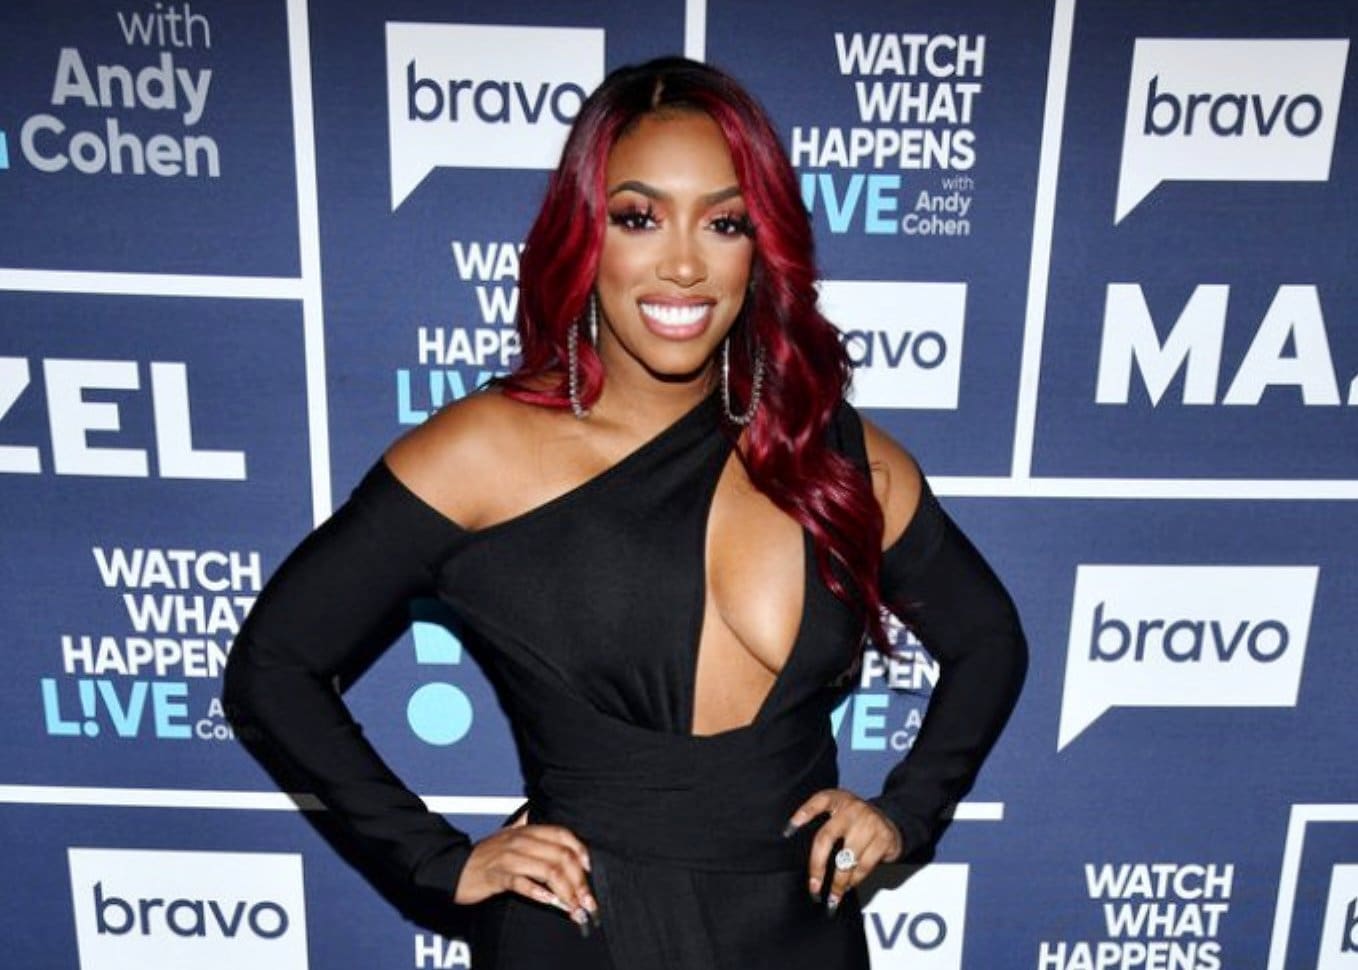 ”porsha-williams-shares-a-video-featuring-her-sister-lauren-williams-and-fans-appreciate-that-shes-using-her-platform”